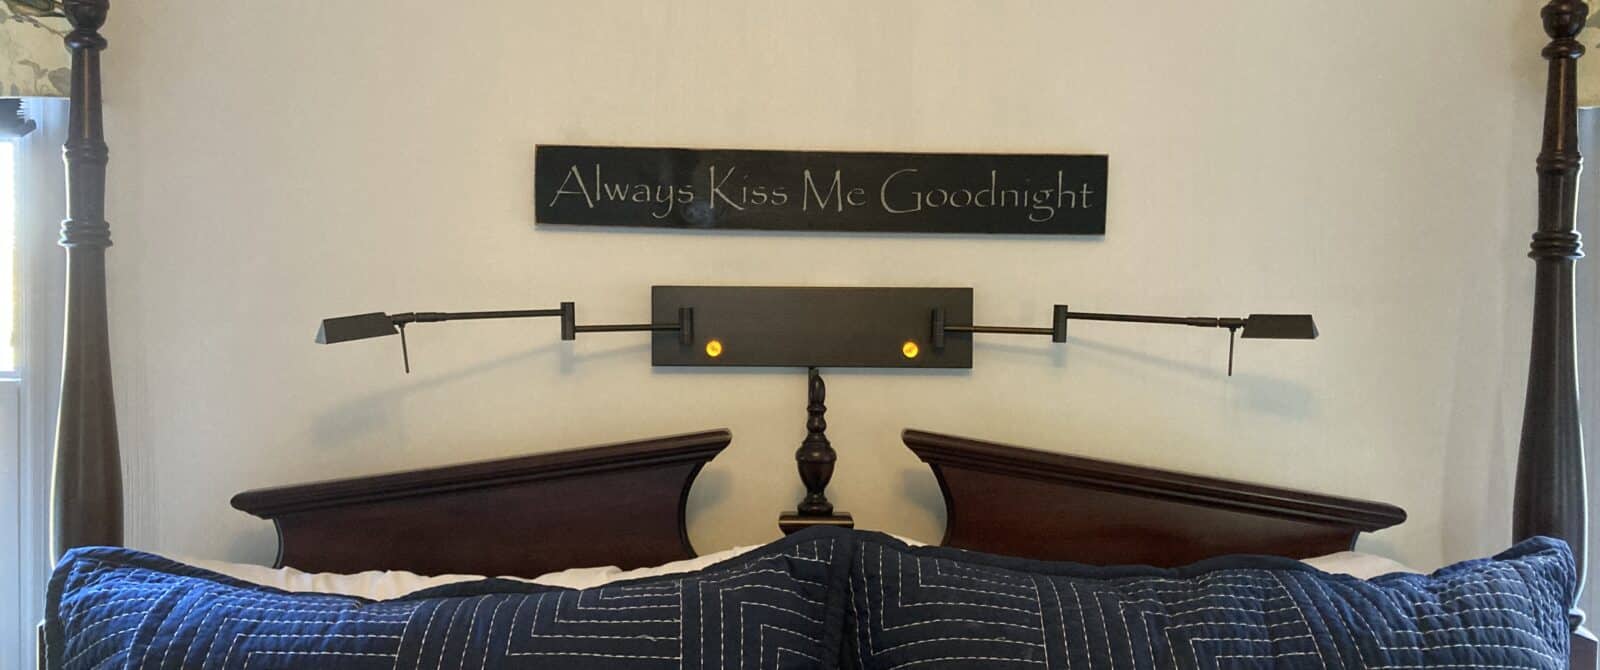 Aways kiss me goodnight plaque over bed